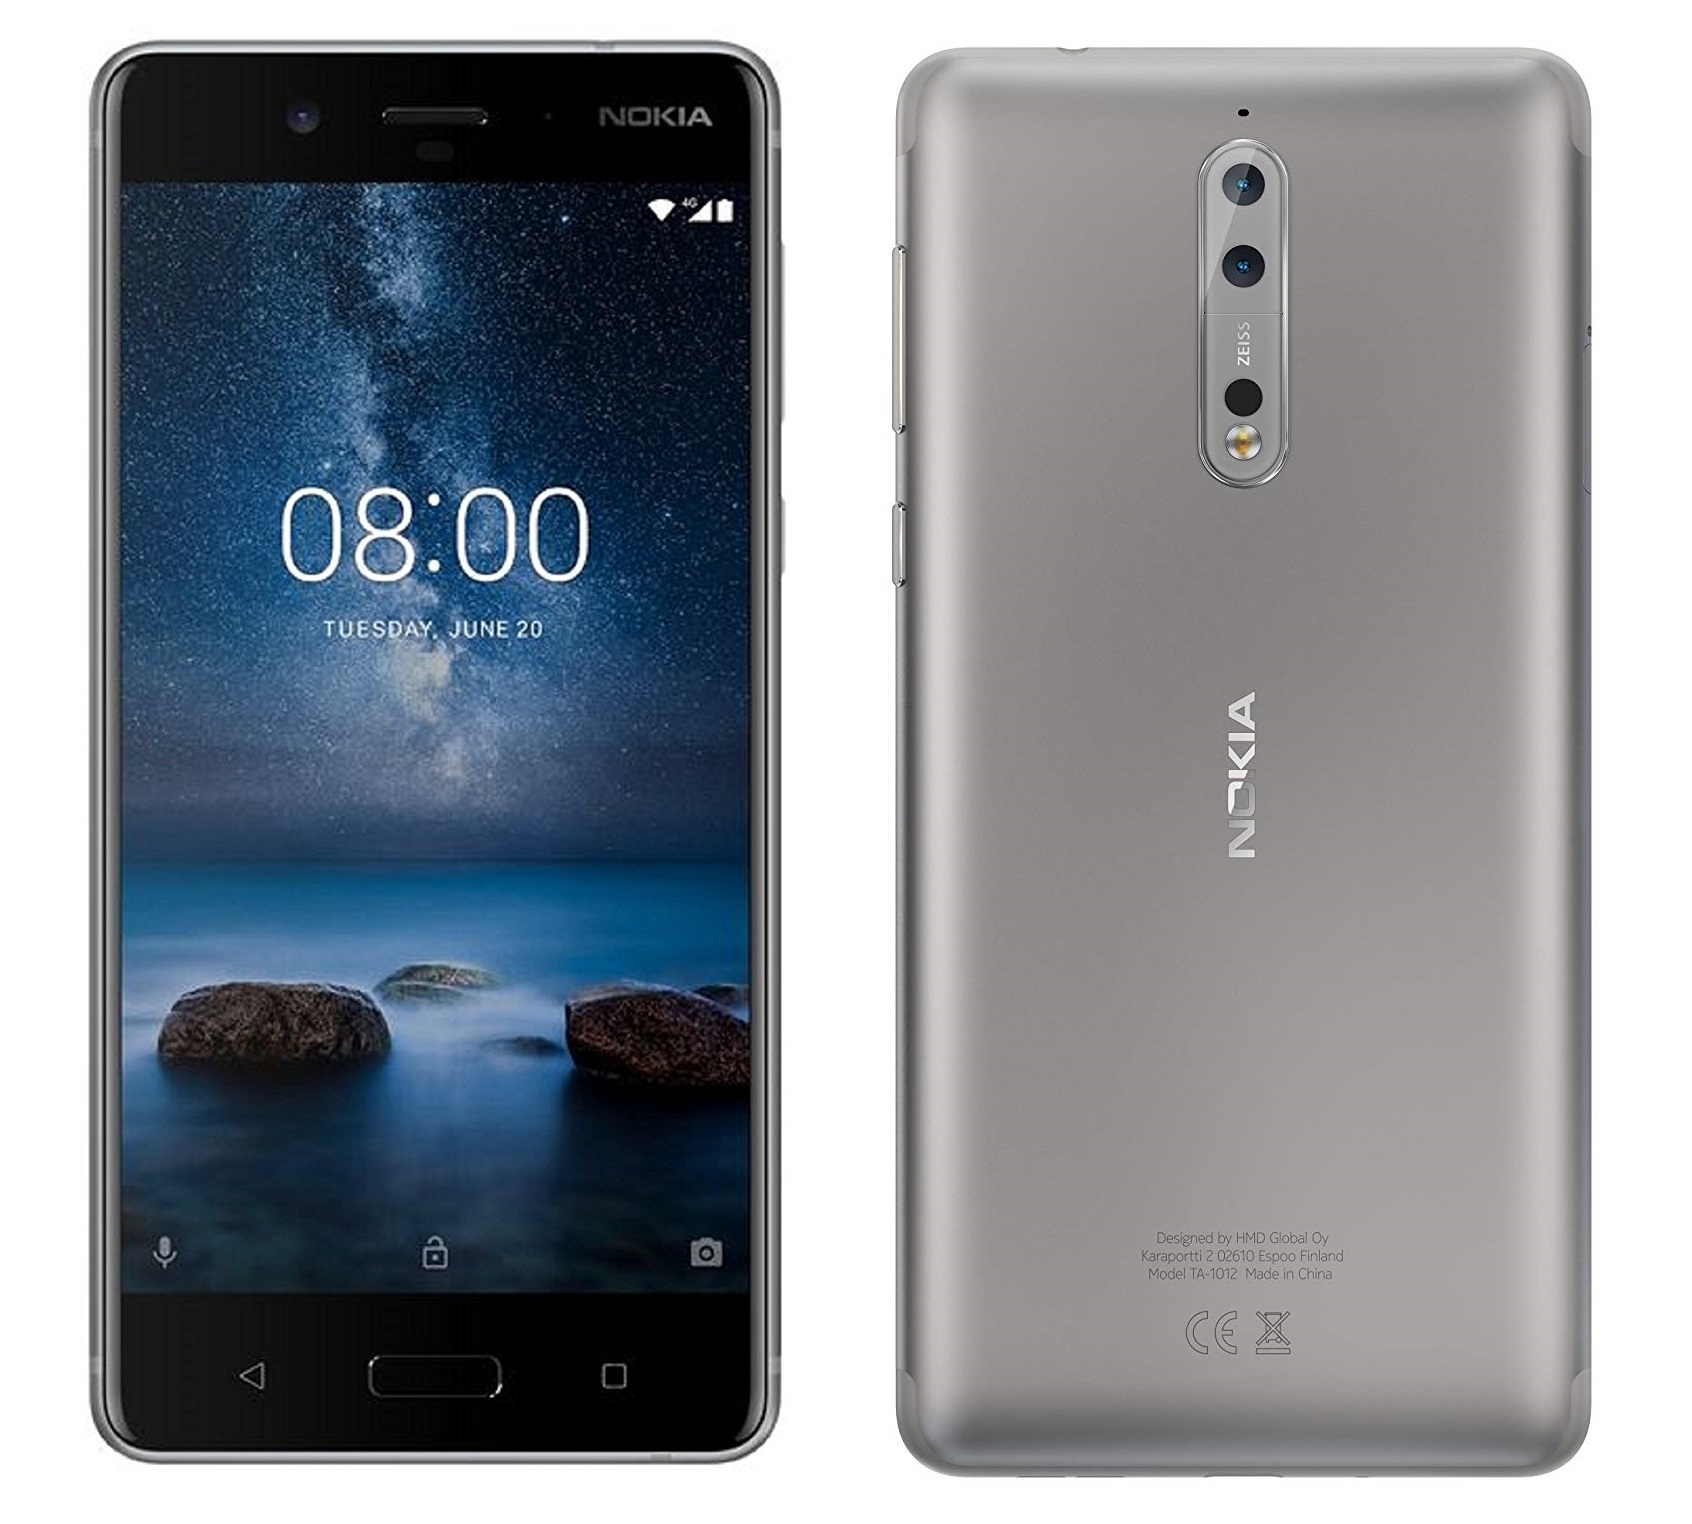 Nokia 8 Smartphone with 4GB RAM, 64GB Internal Memory and 4G LTE Connectivity